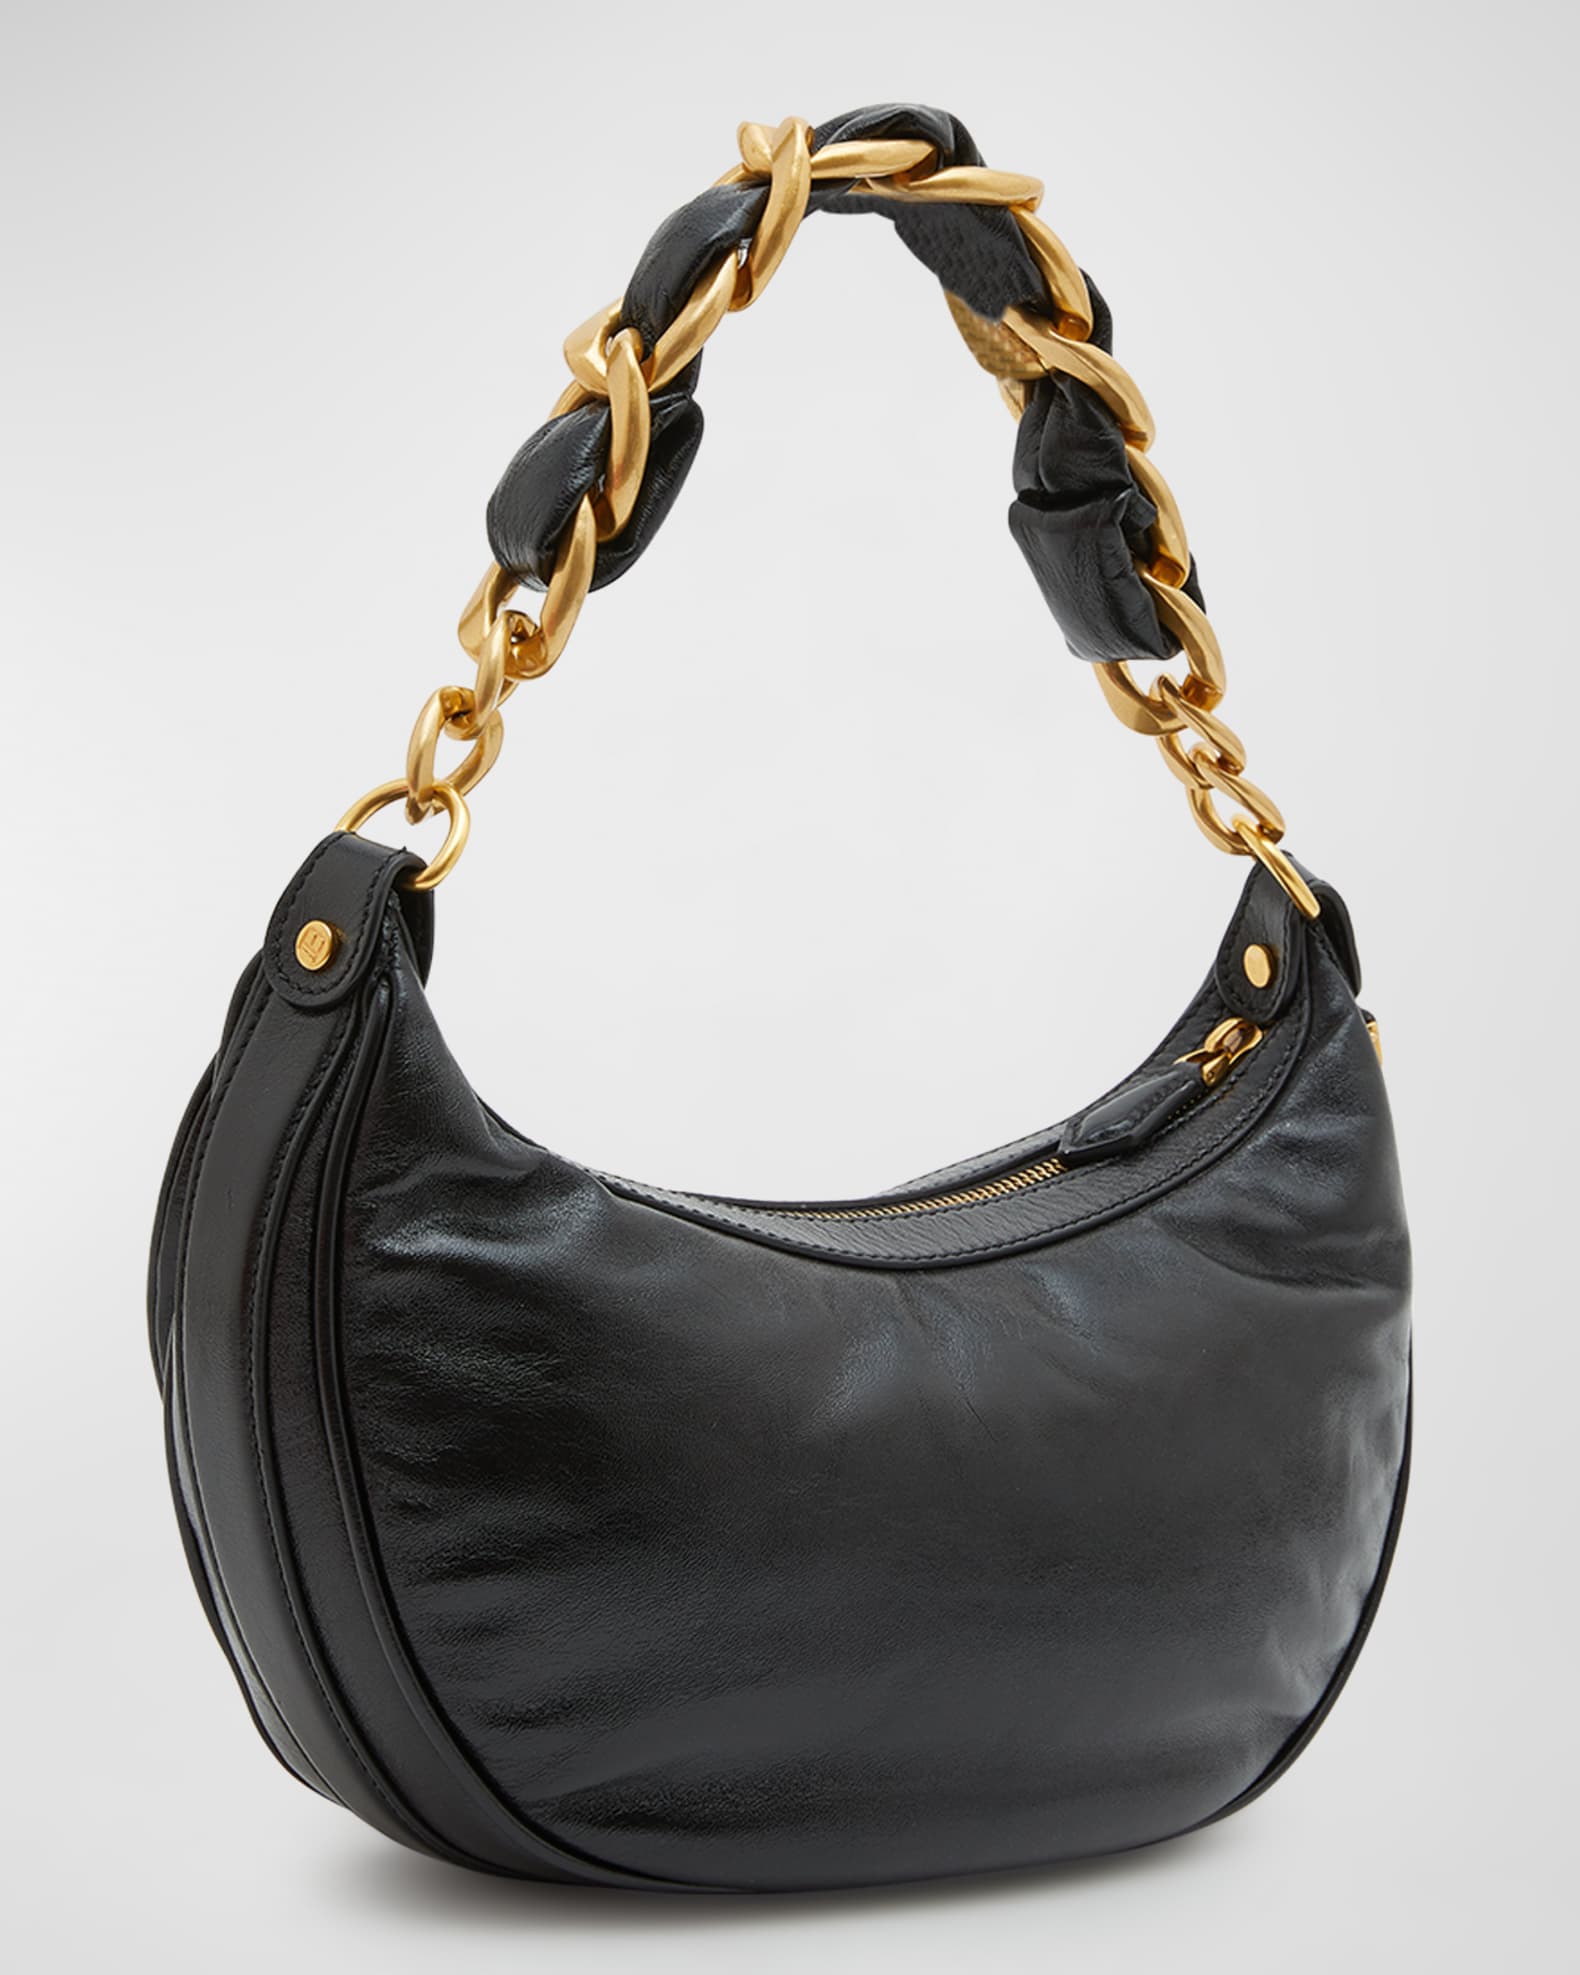 SMALL CHAIN HOBO - LEATHER SHOULDER BAG in neutrals